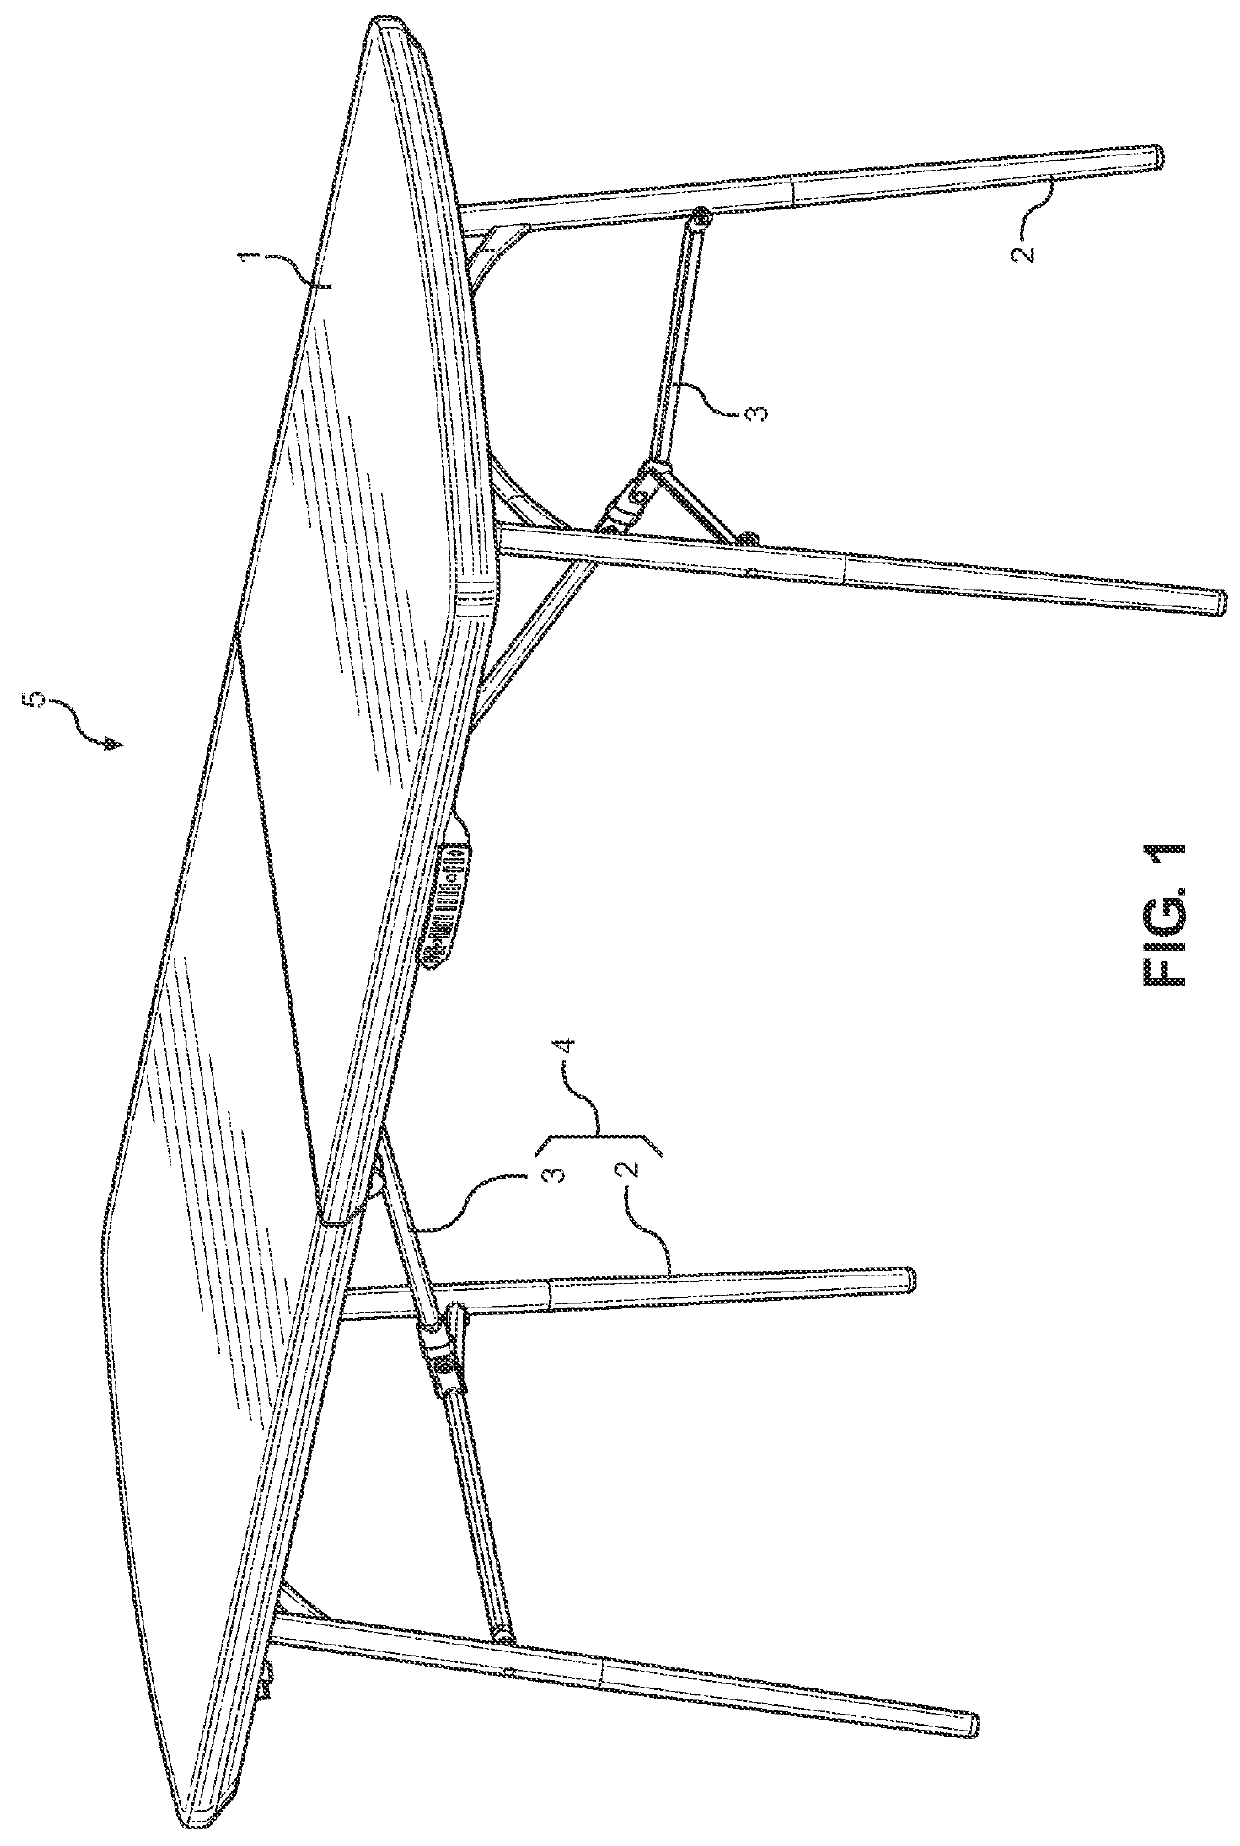 Table hinge and folding mechanism